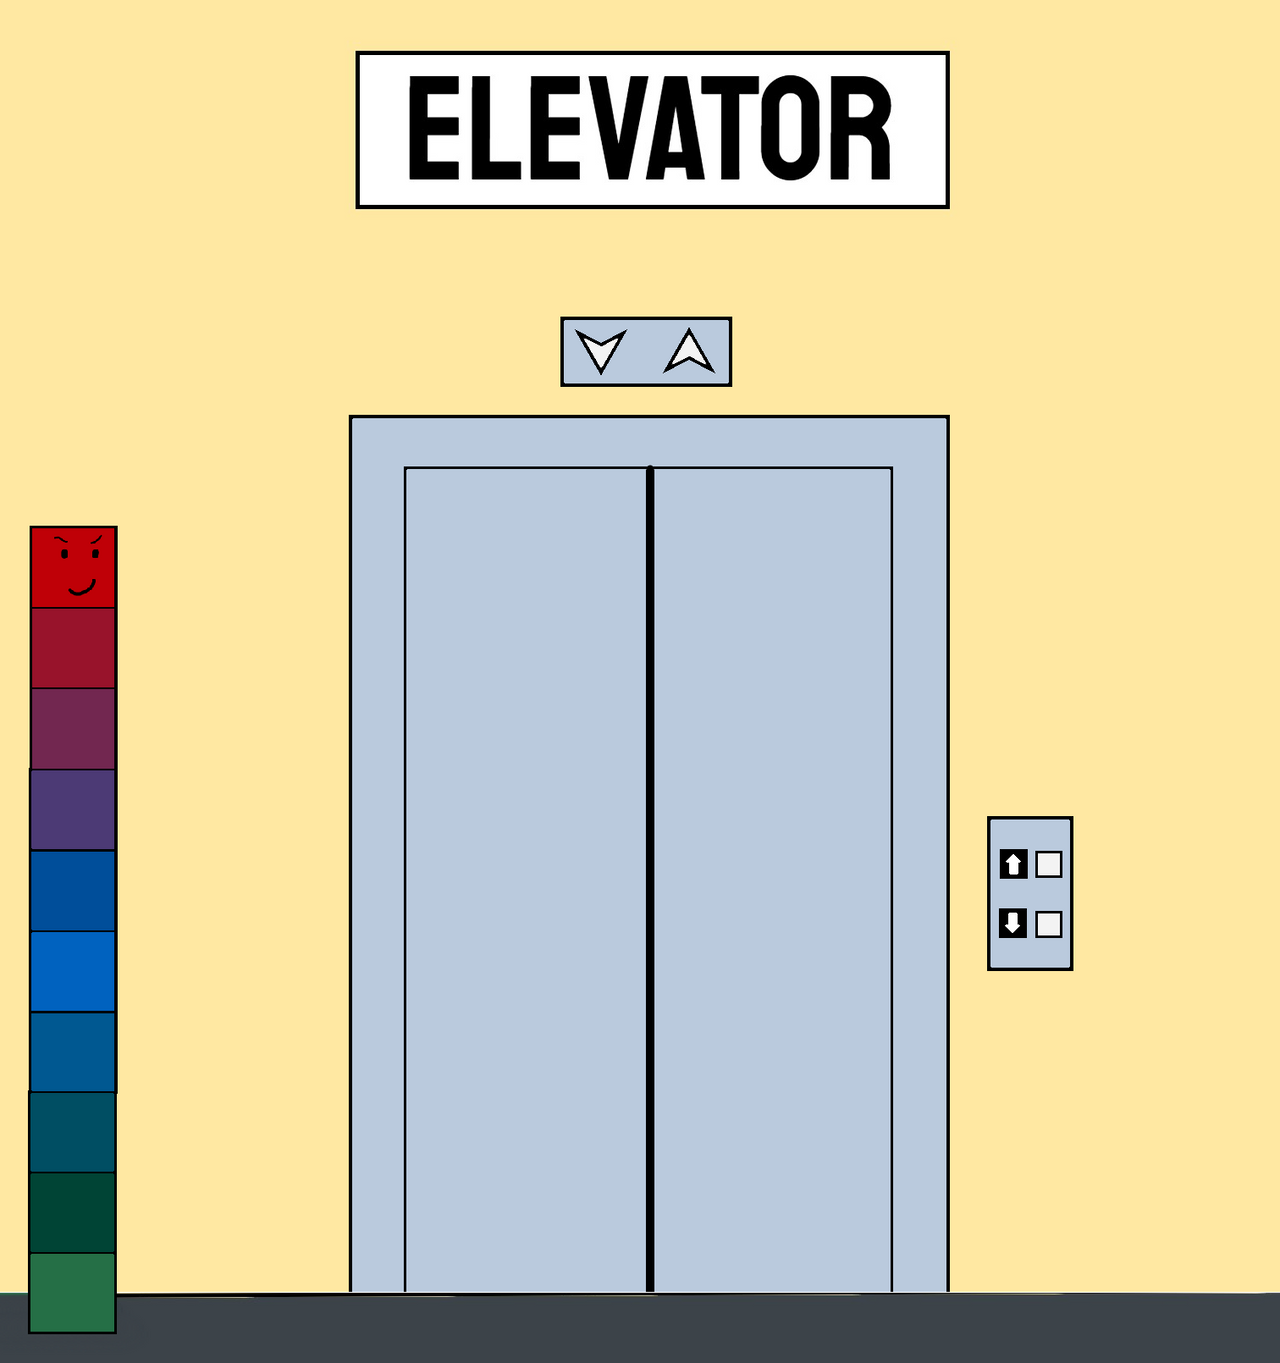 Elevator Travelling is Going to the Elevator by ItzthePrius on DeviantArt